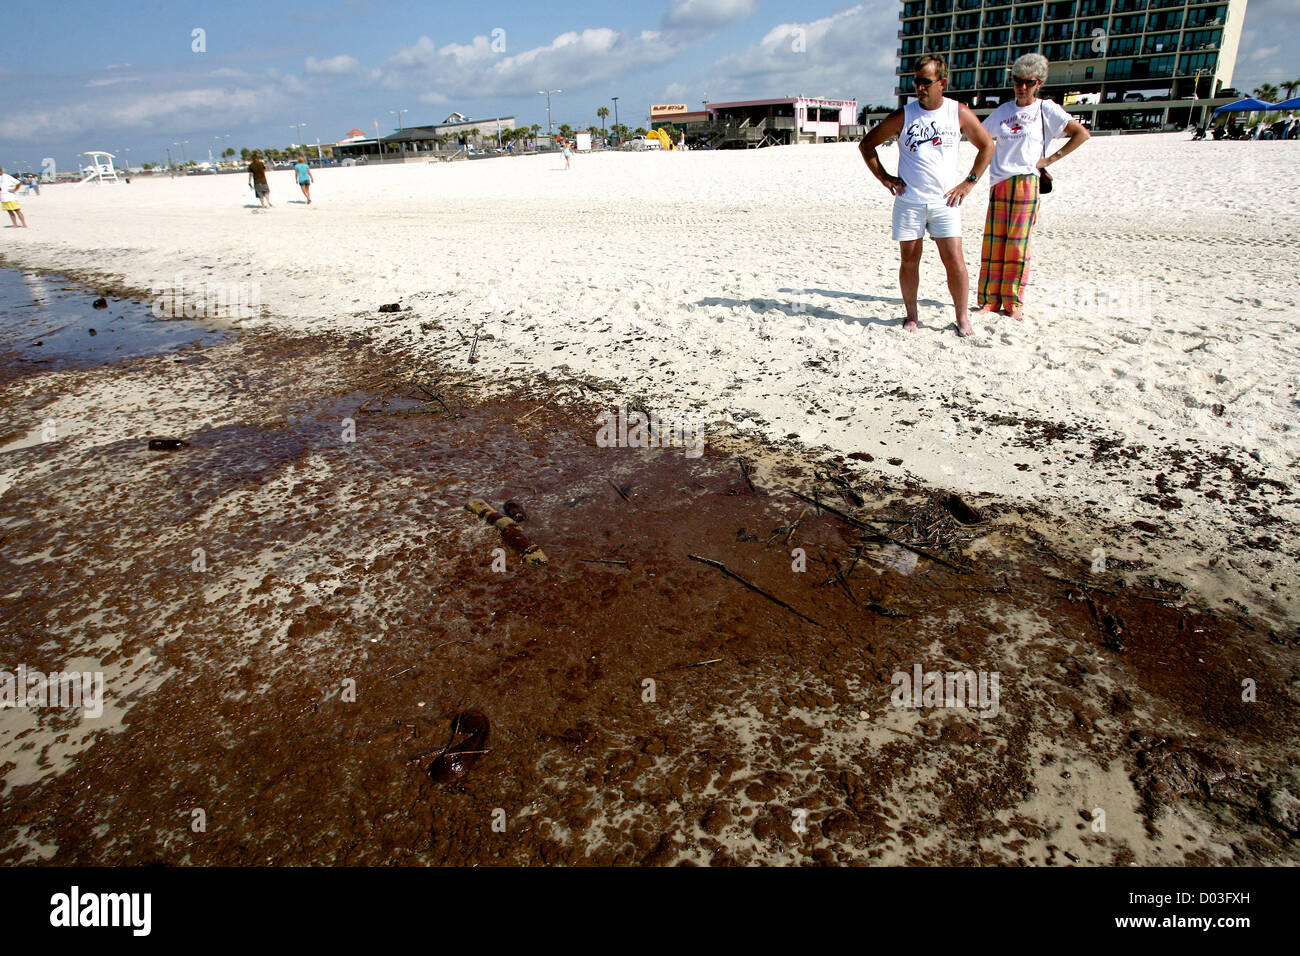 Nov. 15, 2012 - BP has agreed to plead guilty to felony charges and pay $4.5 billion in penalties for the Deepwater Horizon oil-rig accident and spill. PICTURED:  June 12, 2010 - Gulf Shores, Alabama, U.S. - (left to right) Ricky and Lenita Braken look at a large soup of oil that washed up on the public beach in Gulf Shores, Alabama. A large band of oil washed up on the beach earlier in the morning. (Credit Image: © Dan Anderson/ZUMApress.com) Stock Photo